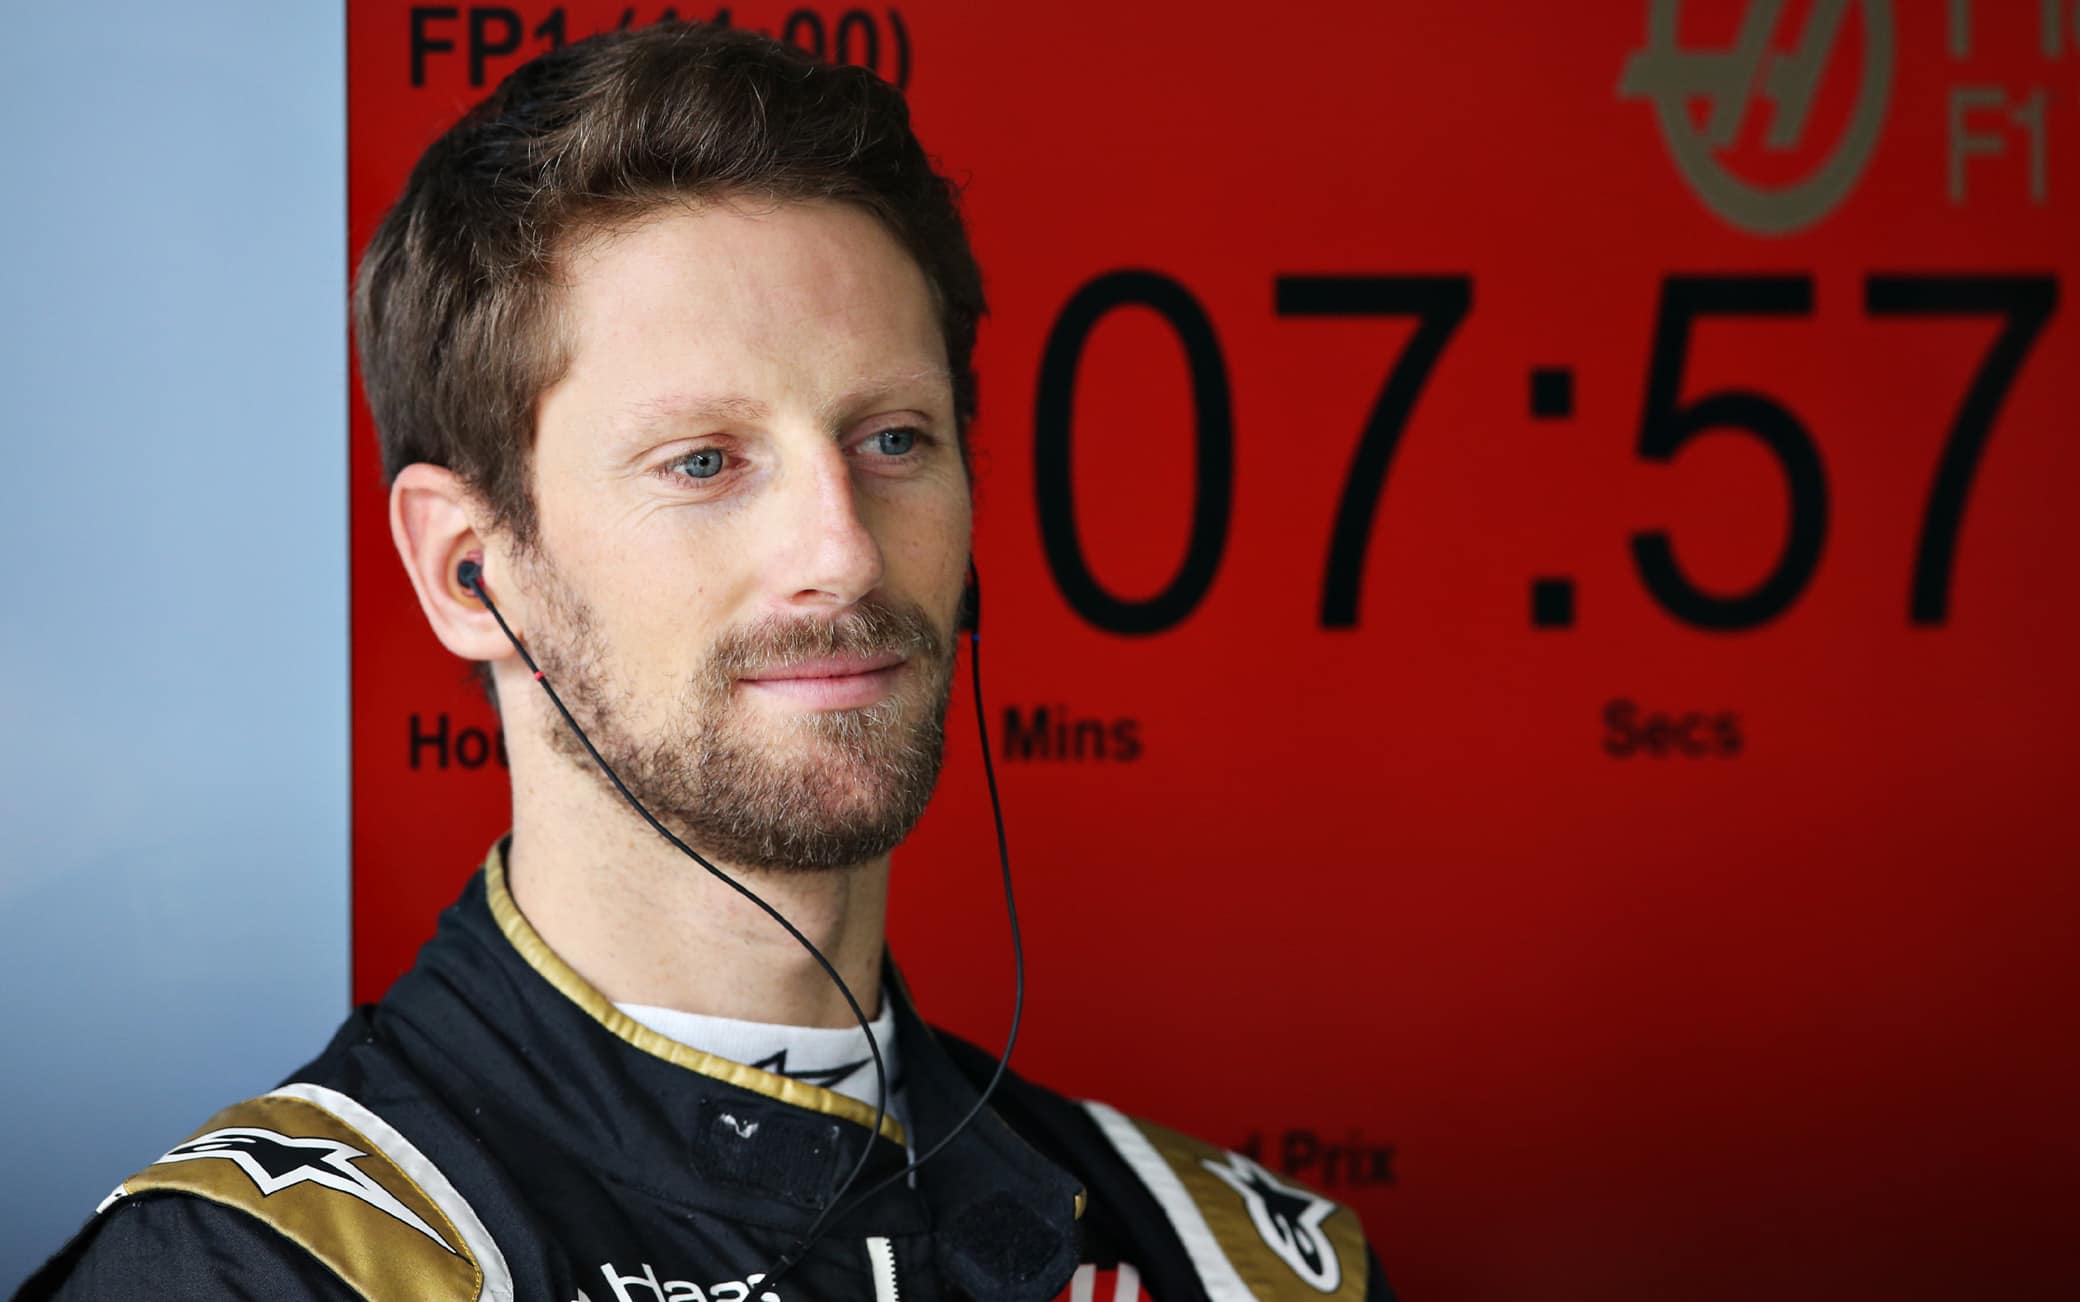 SAO PAULO, BRAZIL - NOVEMBER 15: Romain Grosjean of France and Haas F1 looks on in the garage during practice for the F1 Grand Prix of Brazil at Autodromo Jose Carlos Pace on November 15, 2019 in Sao Paulo, Brazil. (Photo by Charles Coates/Getty Images)